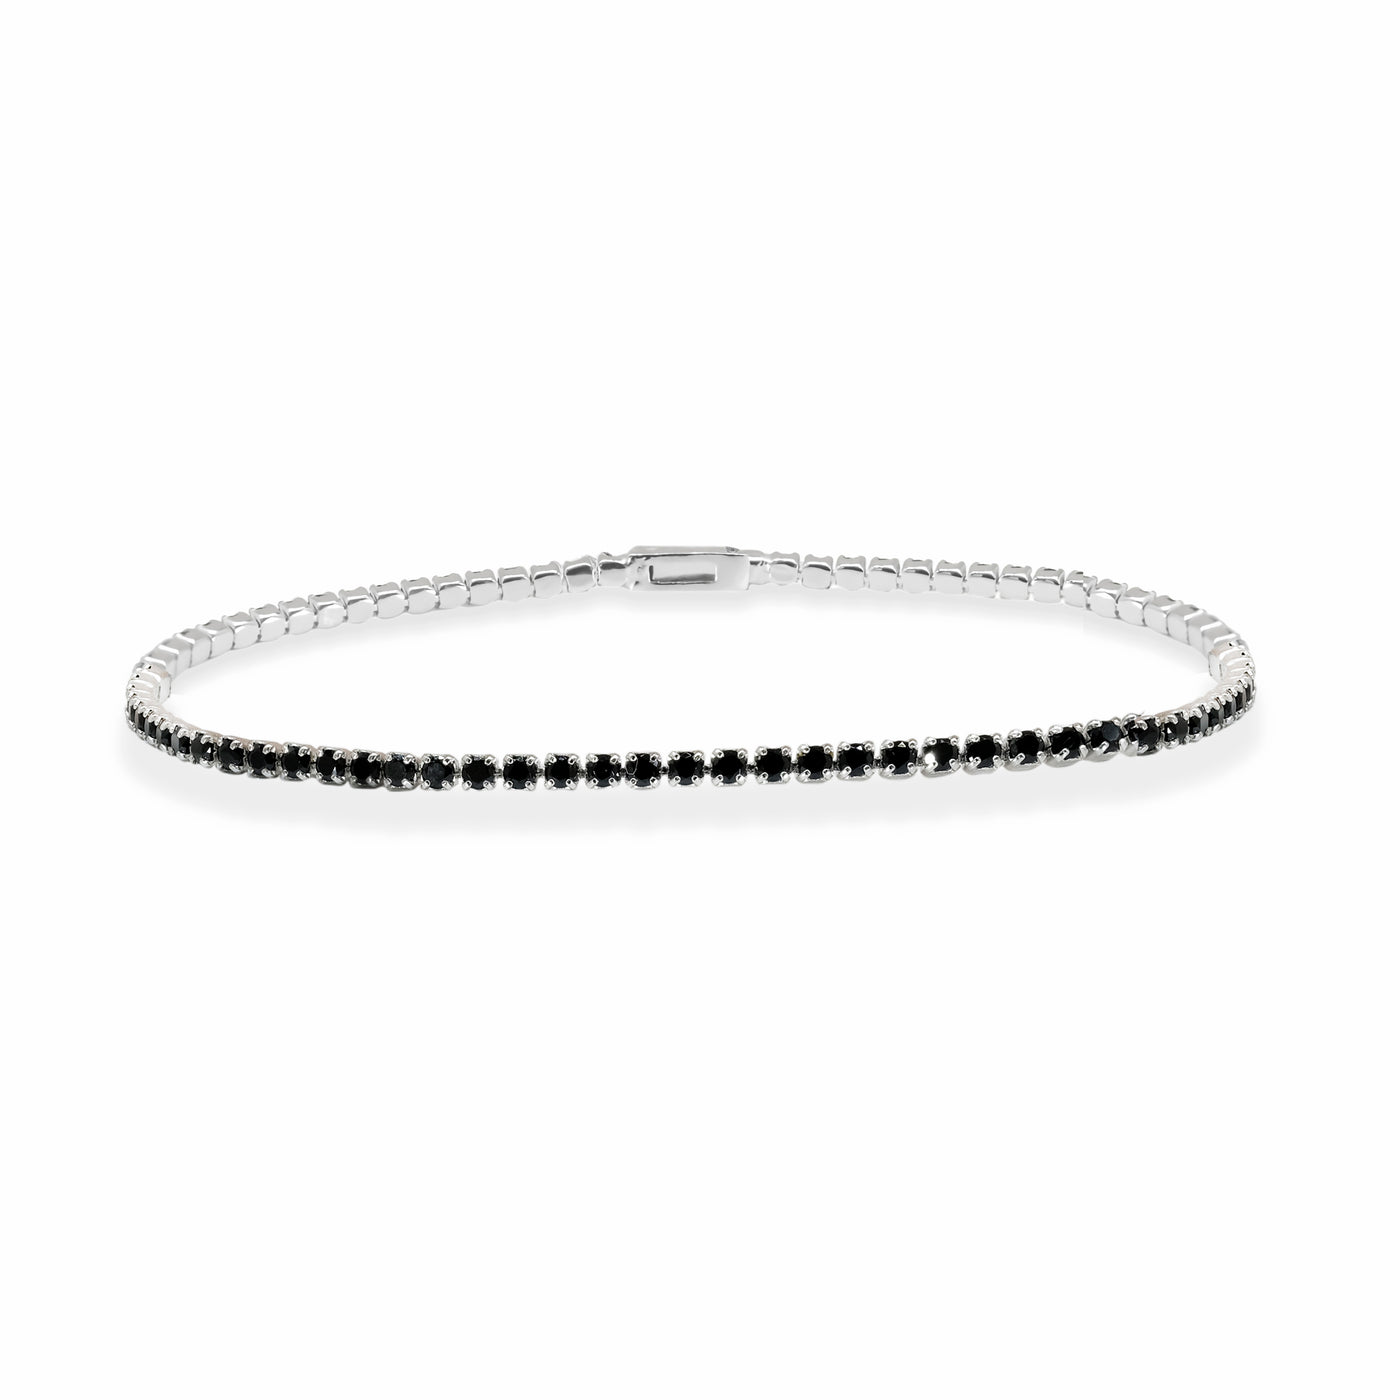 Sterling silver bracelet with cubic zirconia